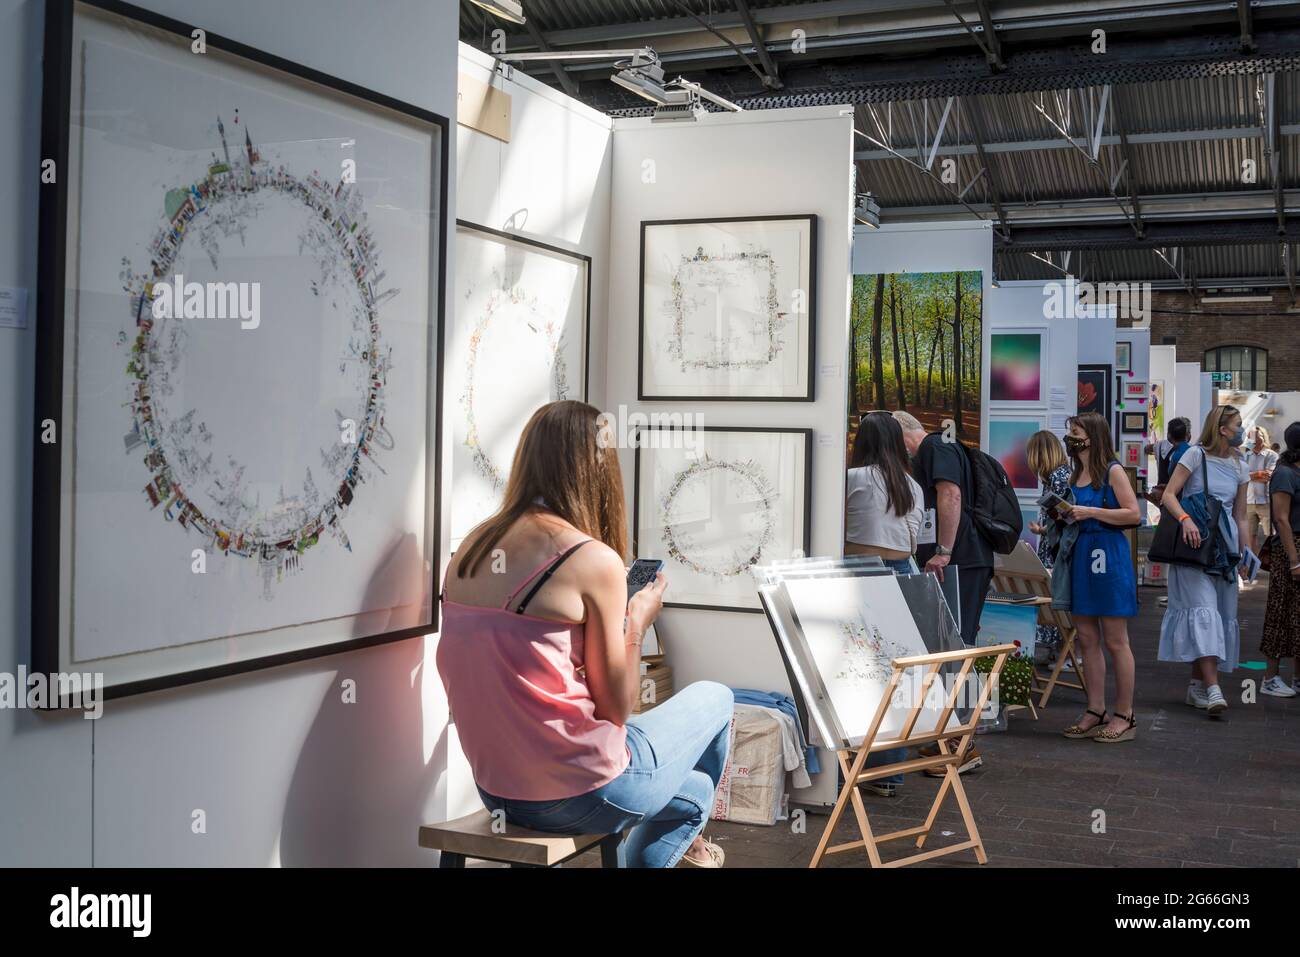 The Other Art Fair, presented by Saatchi Art, Held in West Handyside Canopy, Coal Drops Yard, Kings Cross, London, UK-32.dng Stockfoto